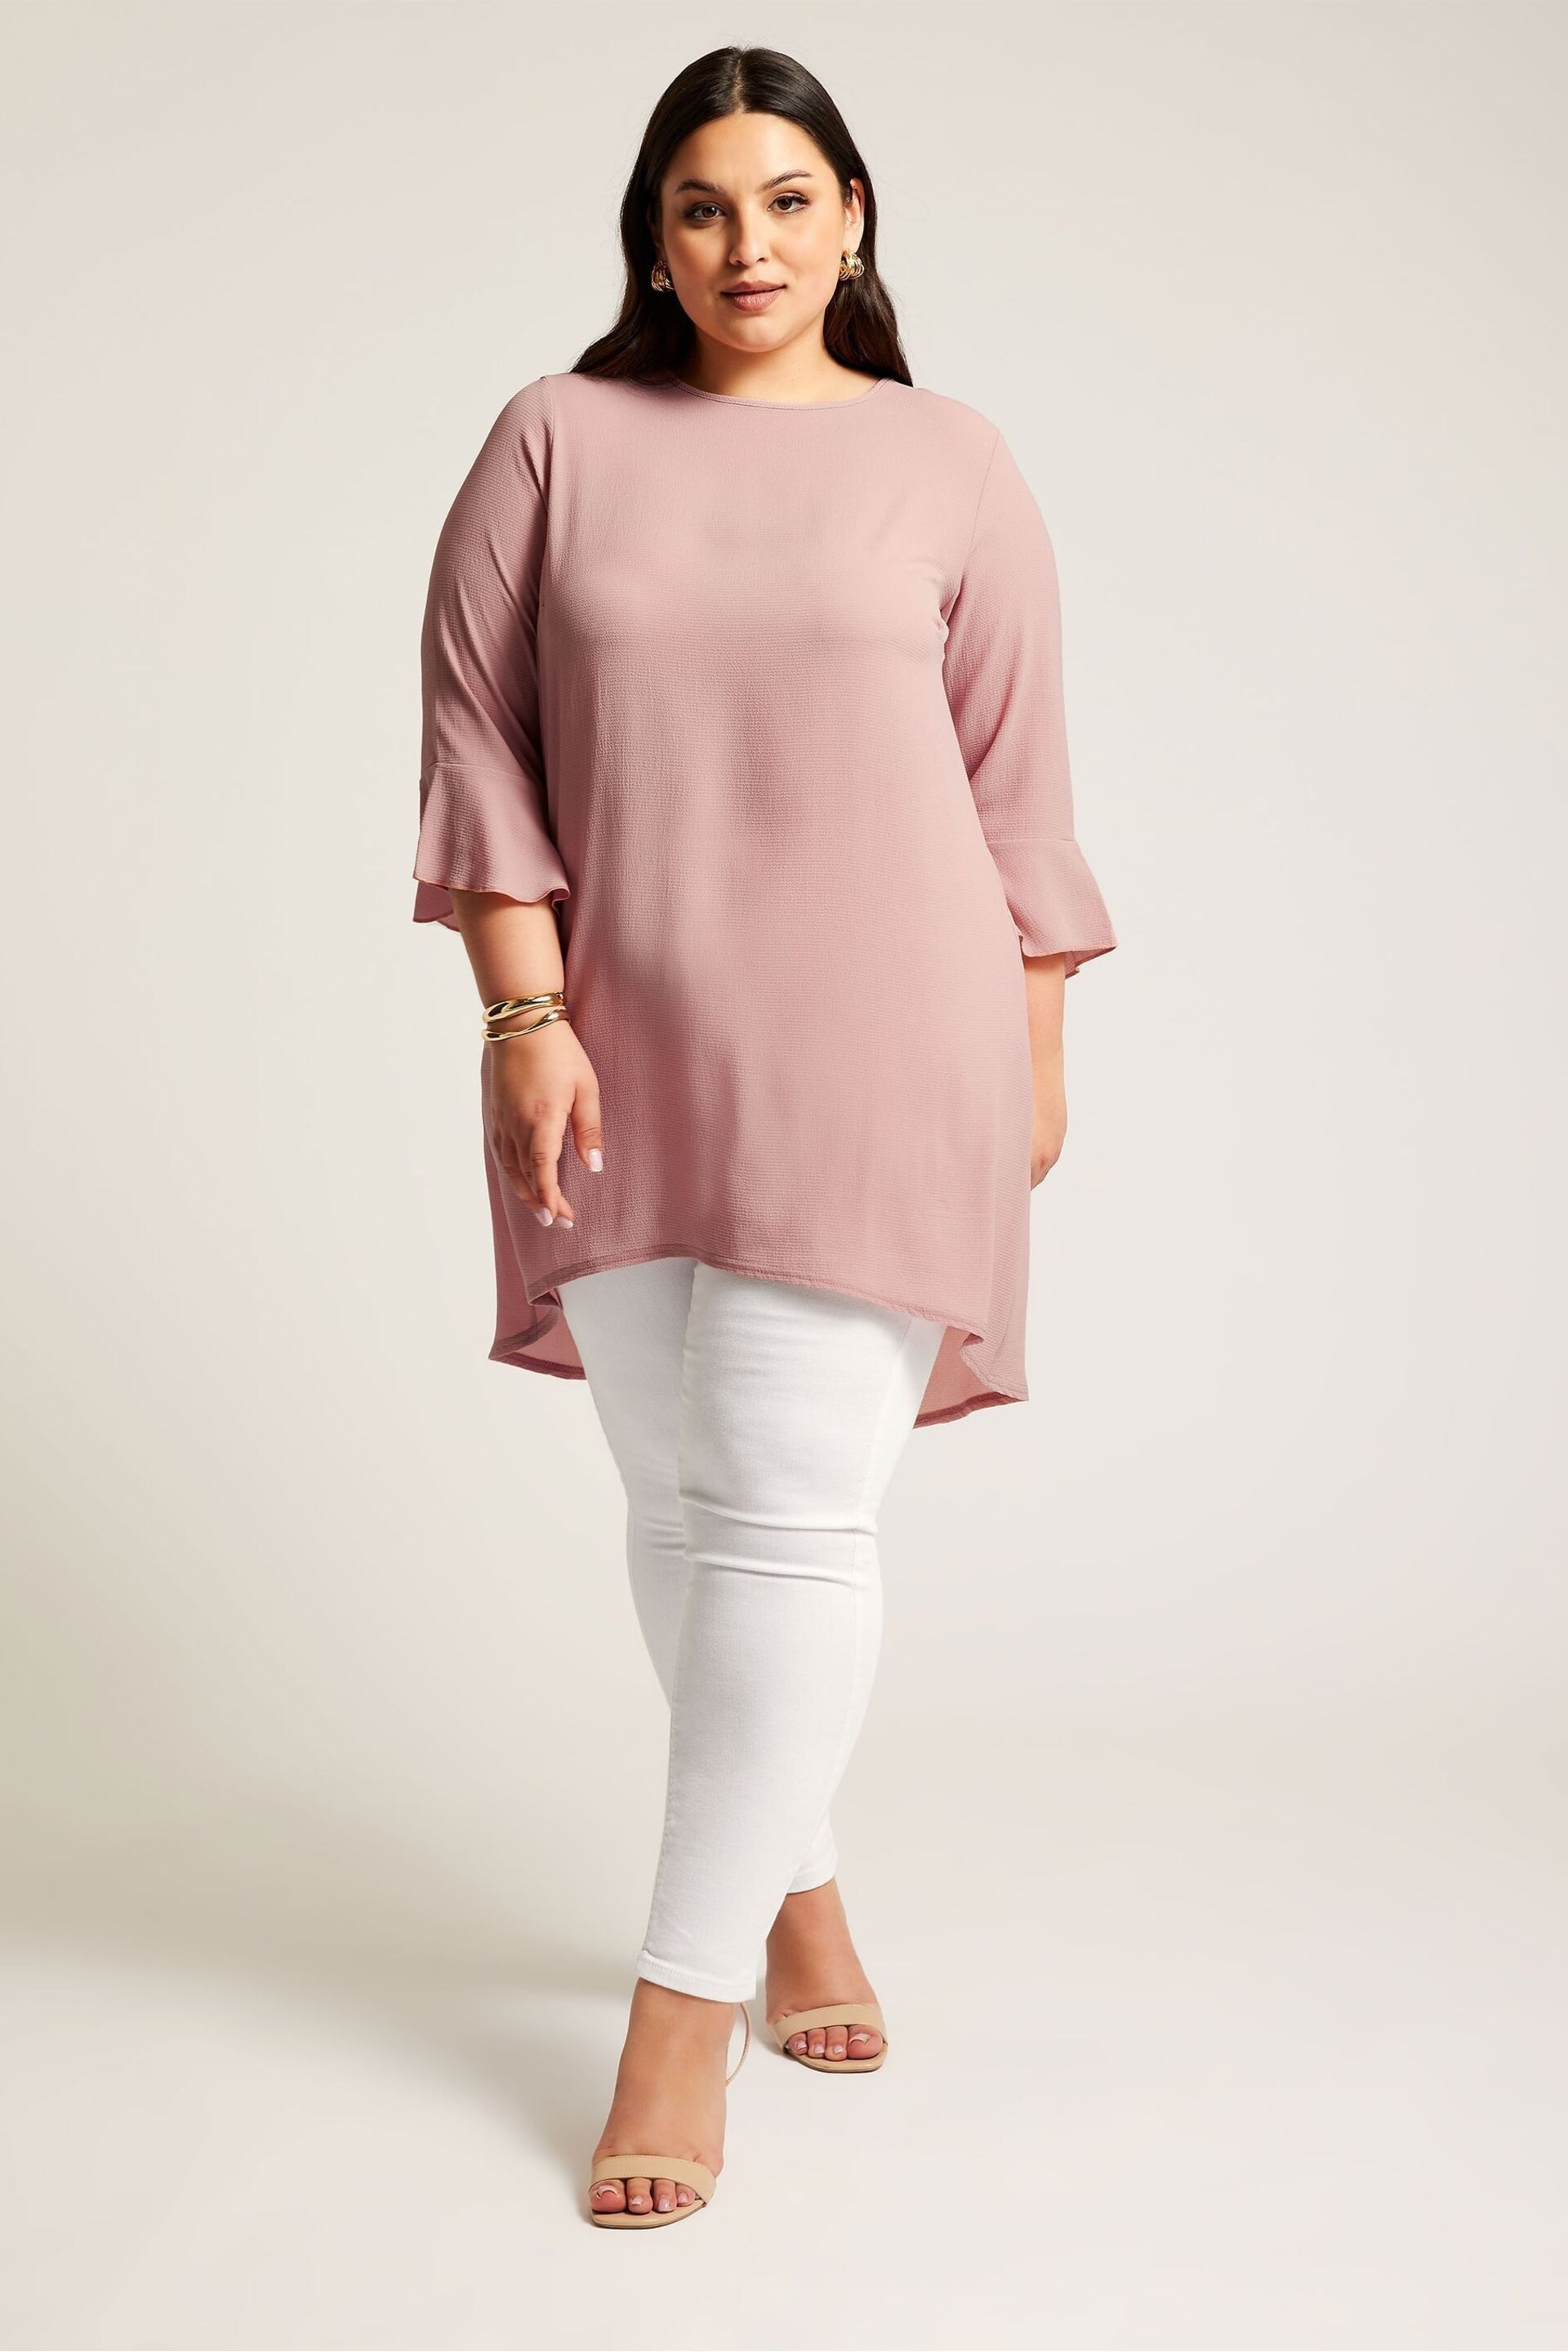 Yours Curve Pink Flute Sleeve Tunic - Image 1 of 2